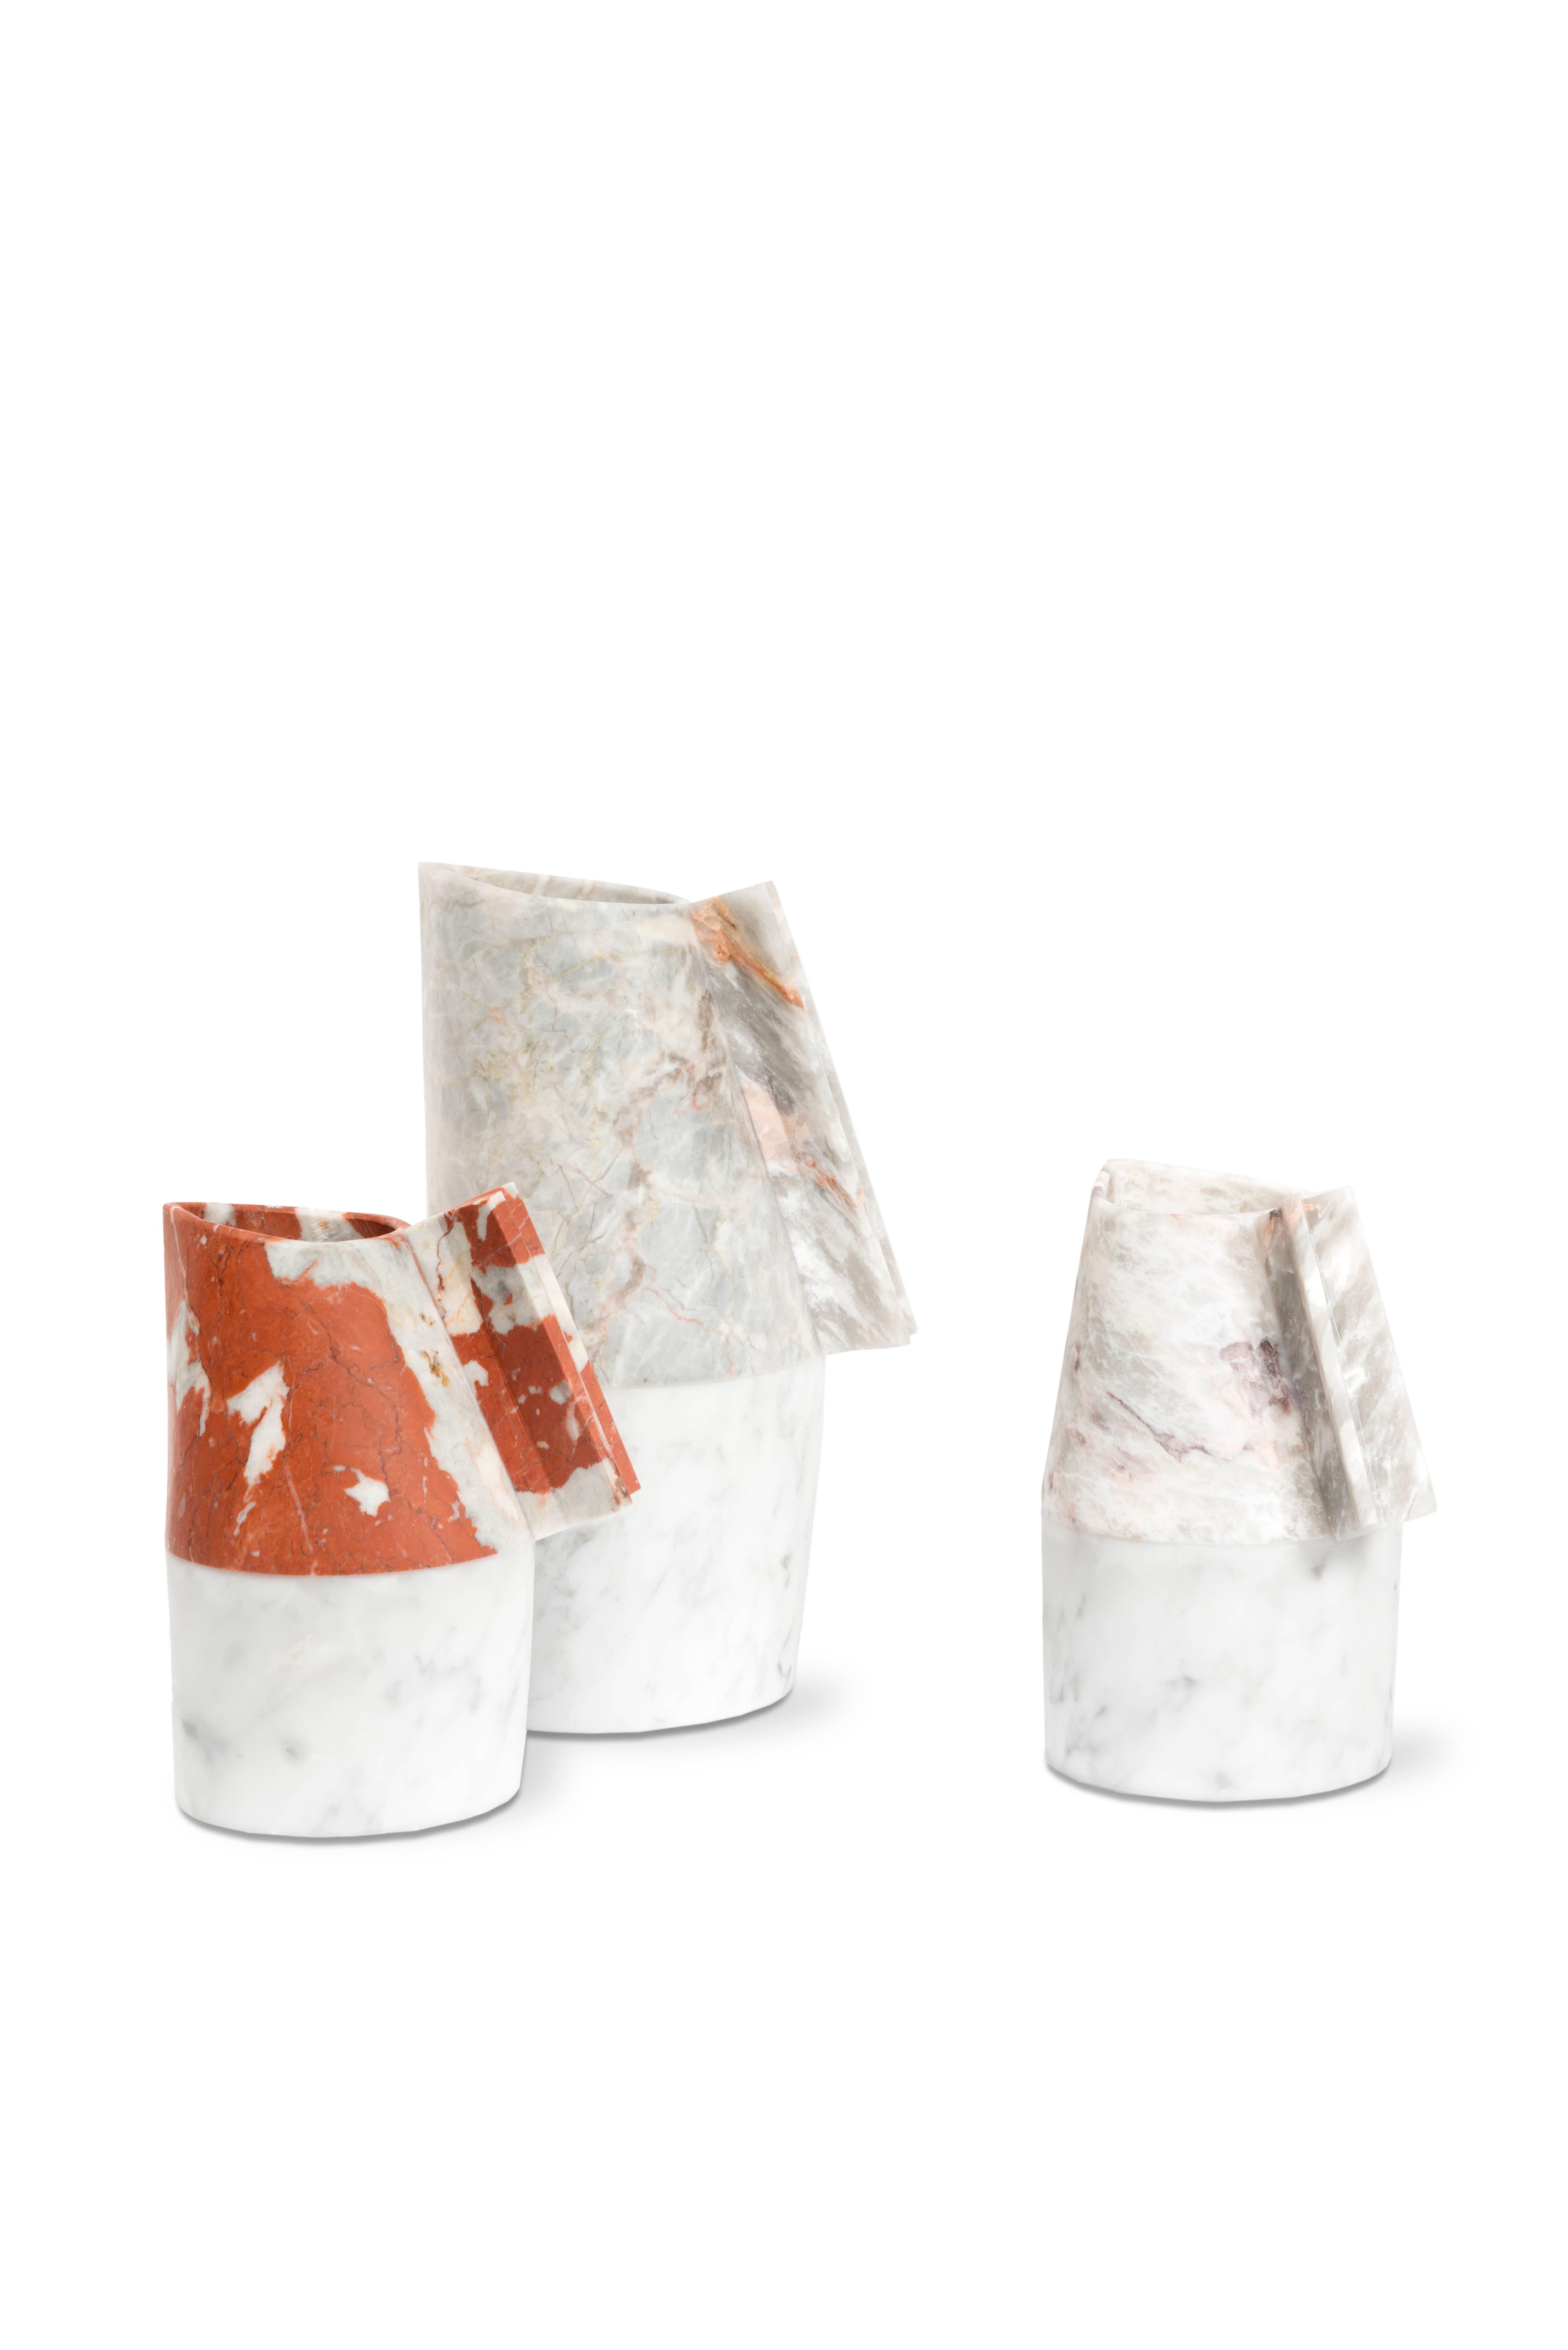 Marble Versi Carafe Small A, by Patricia Urquiola for Editions Milano For Sale